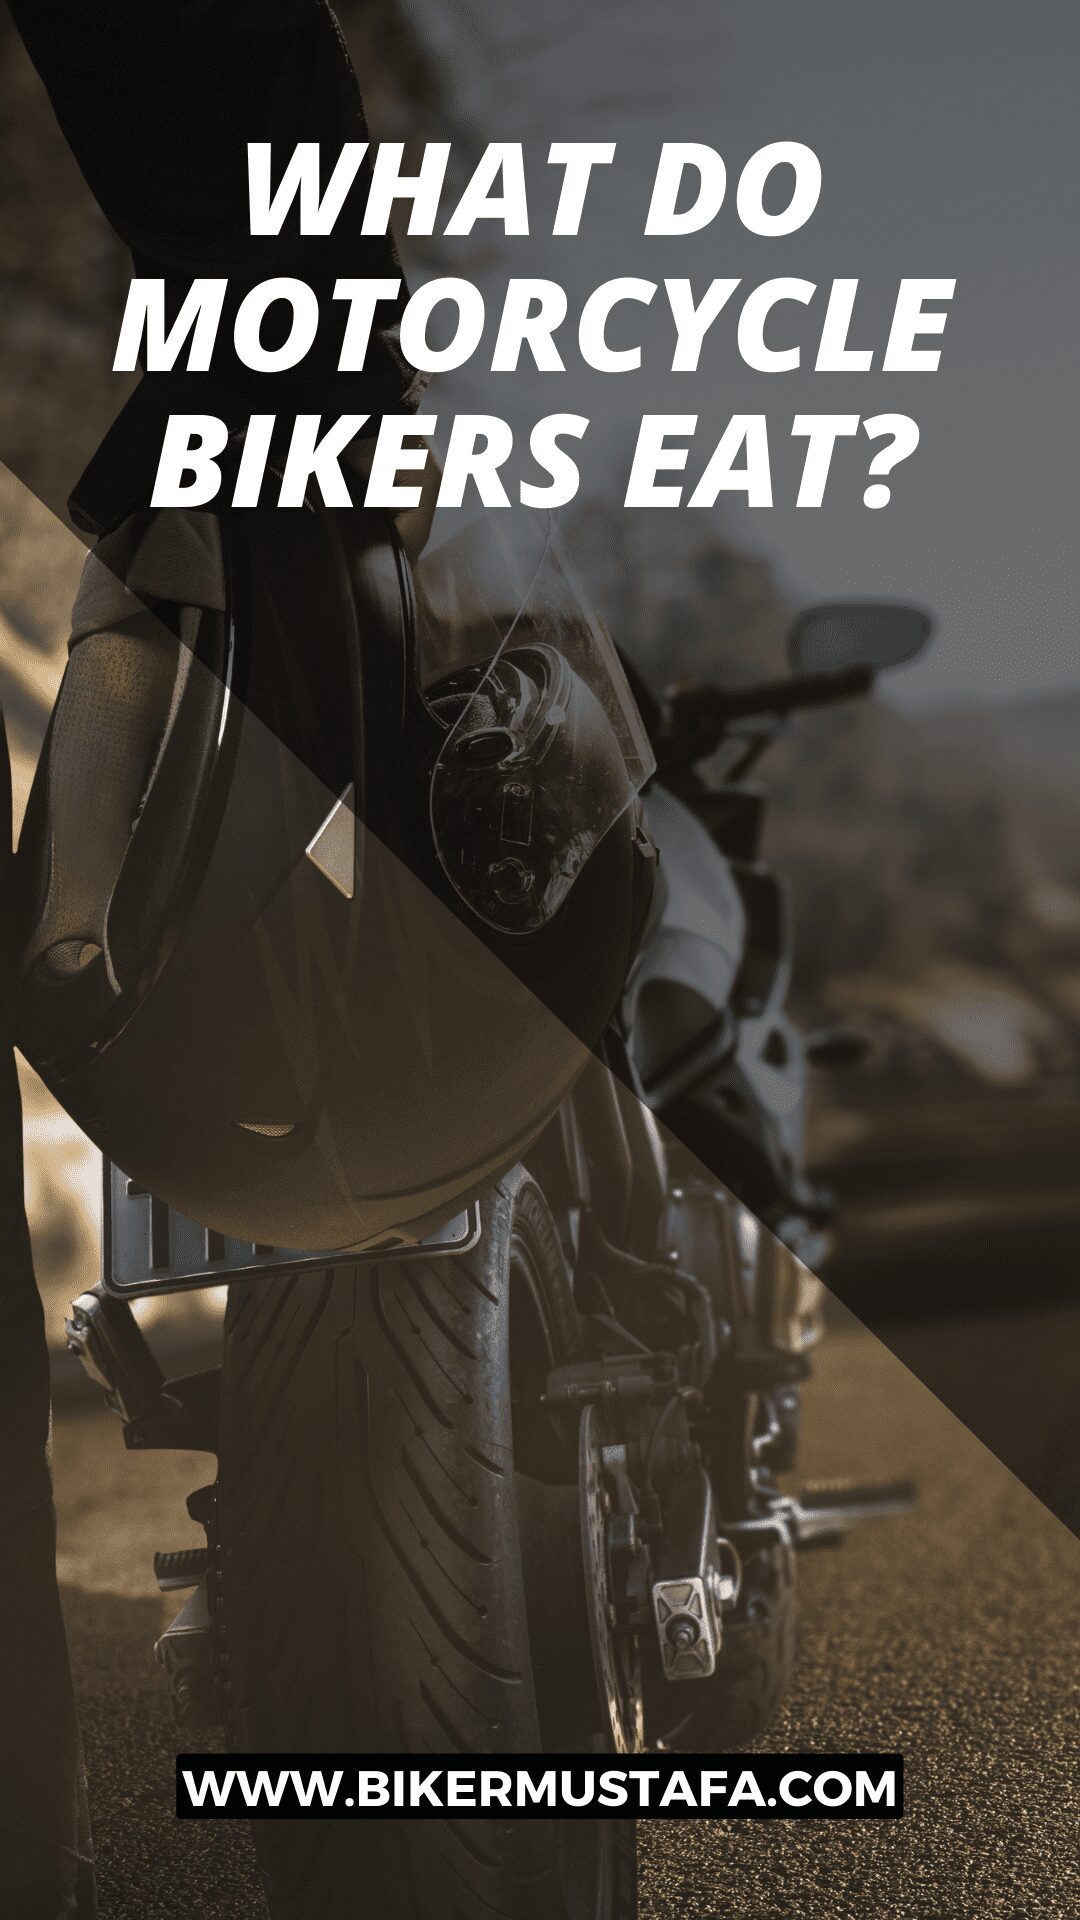 What Do Motorcycle Bikers Eat?